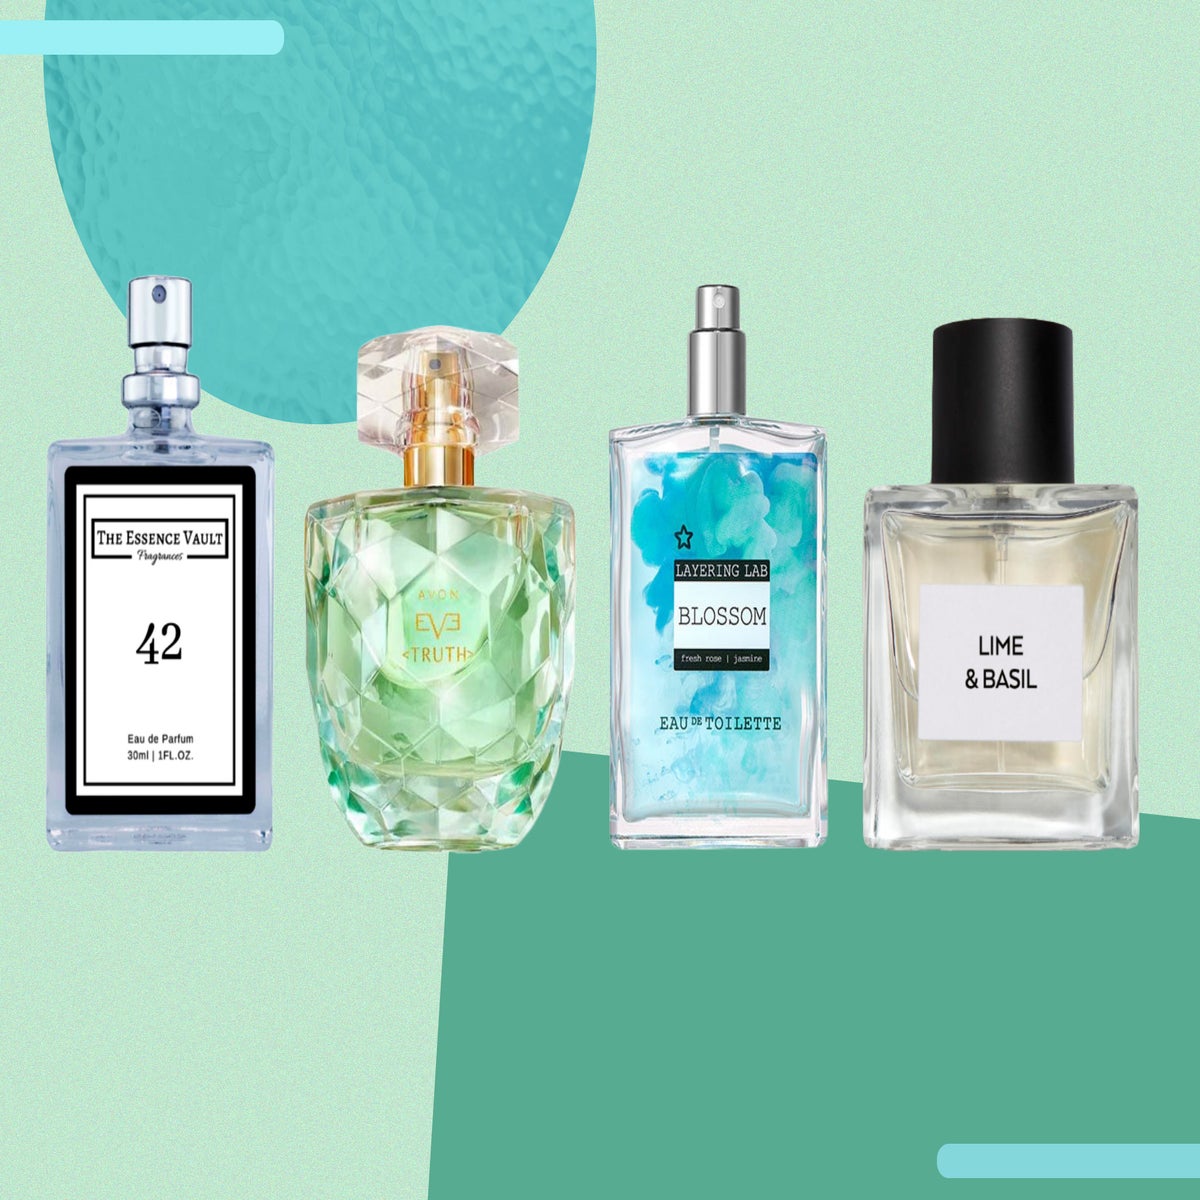 Save money and own tons of different fragrances with the added benefit